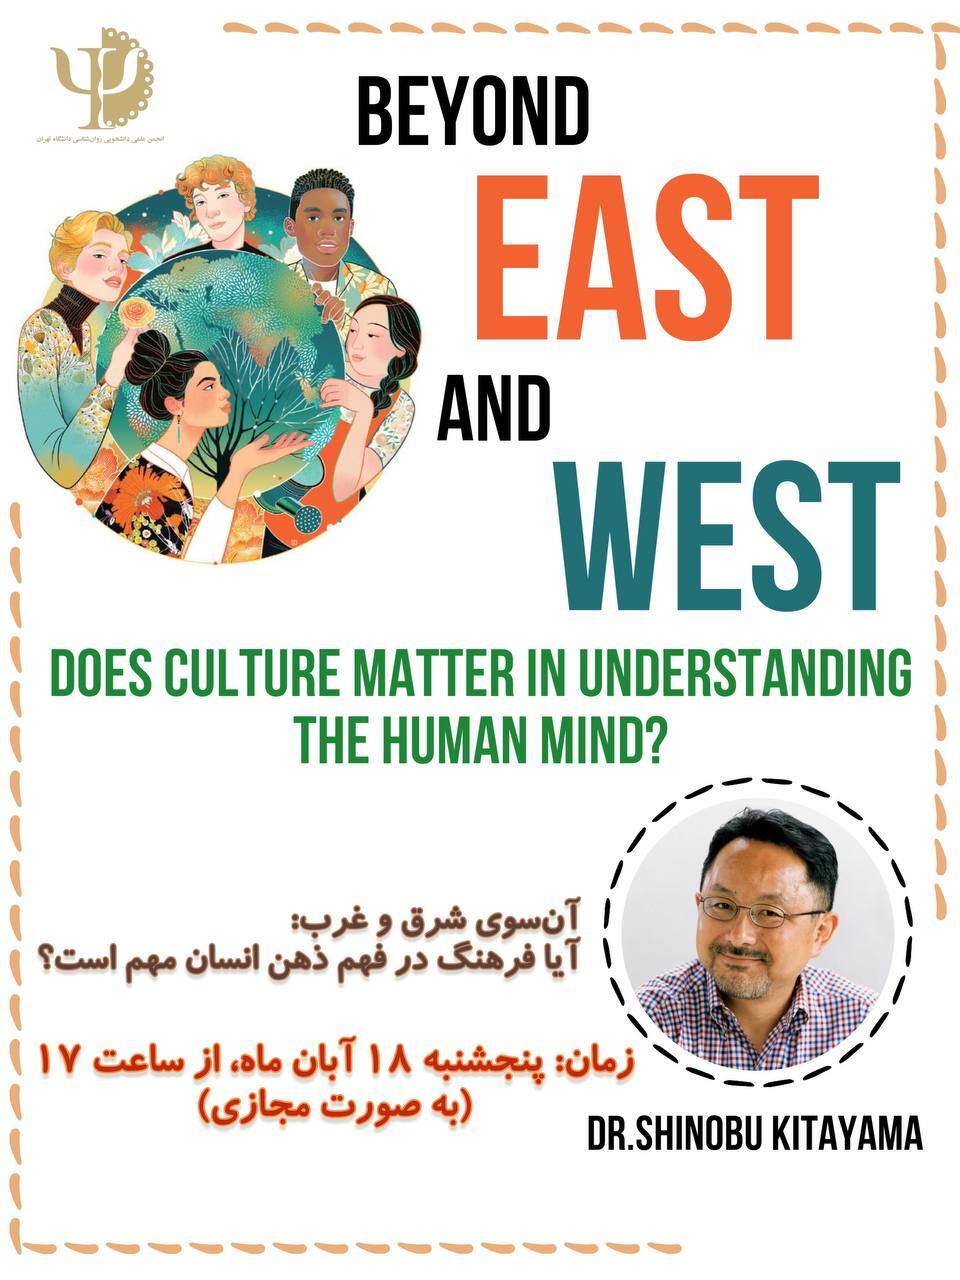 Talk title: Does culture matter in understanding the human mind?